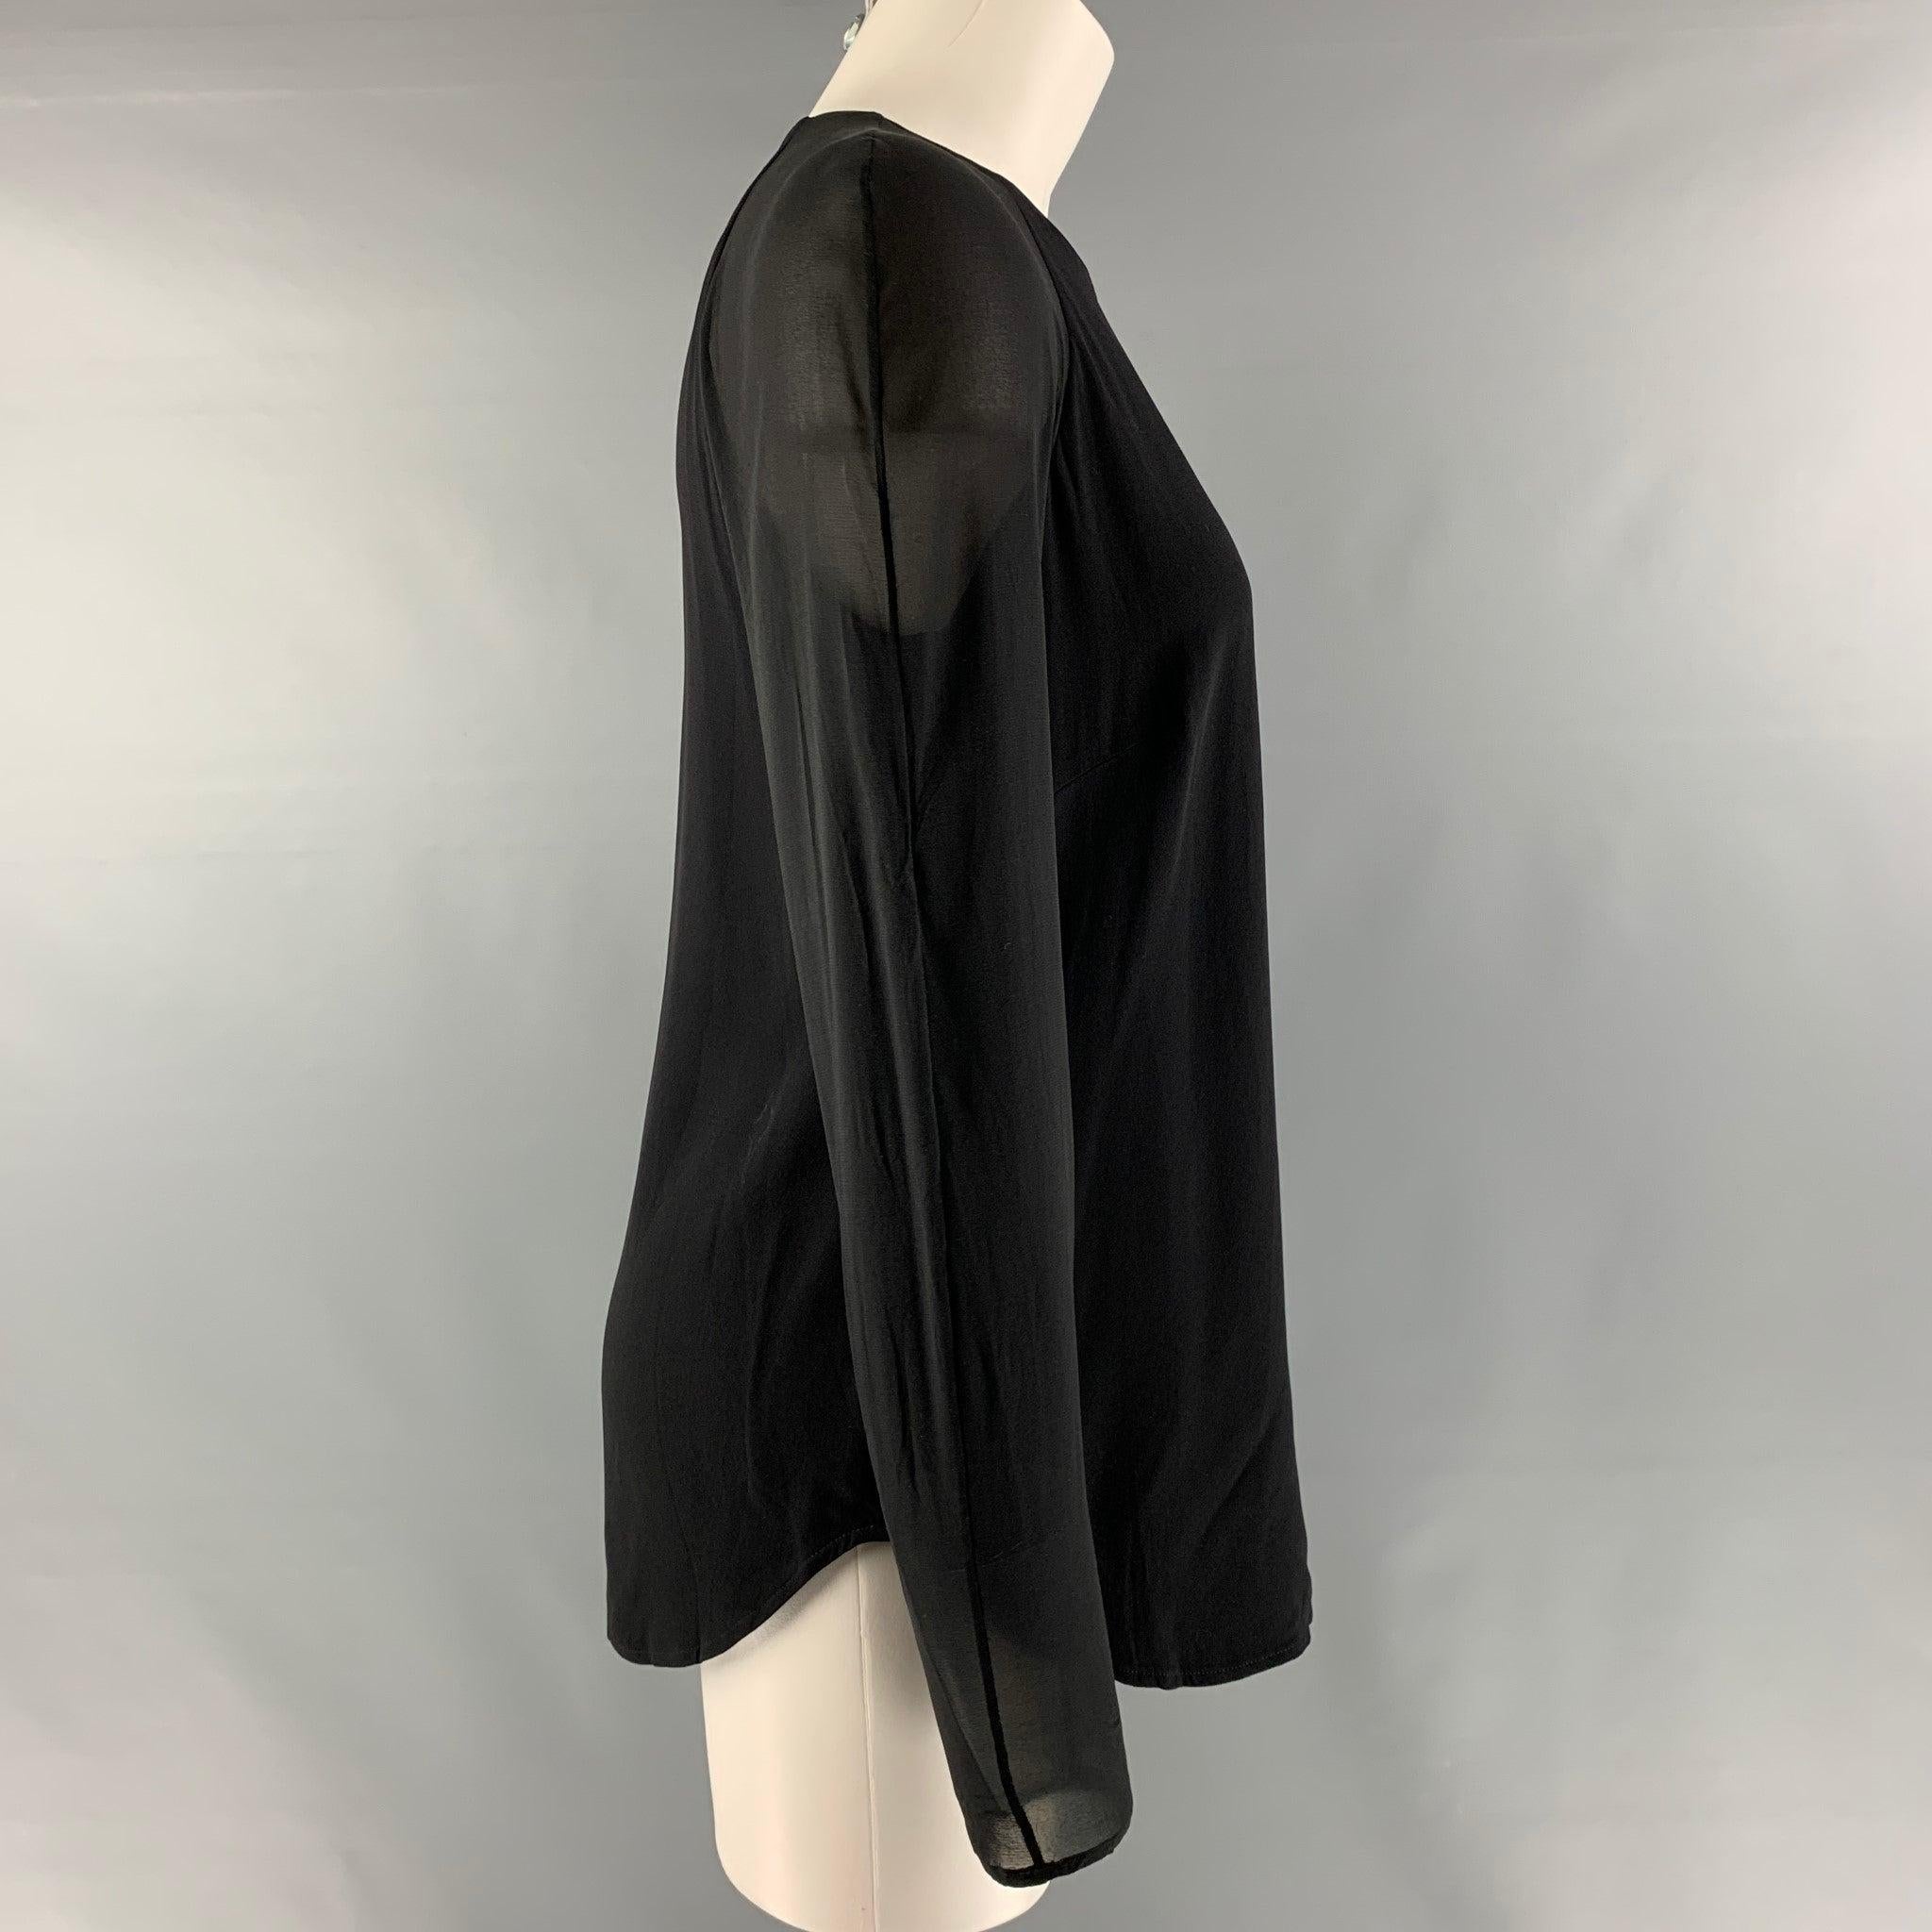 RALPH LAUREN 'BLACK LABEL by' raglan long sleeve blouse comes in a black acetate and viscose featuring see through sleeves and an invisible zipper closure at center back. Made in USA.Very Good Pre-Owned Condition. Moderate marks at back. 

Marked:  